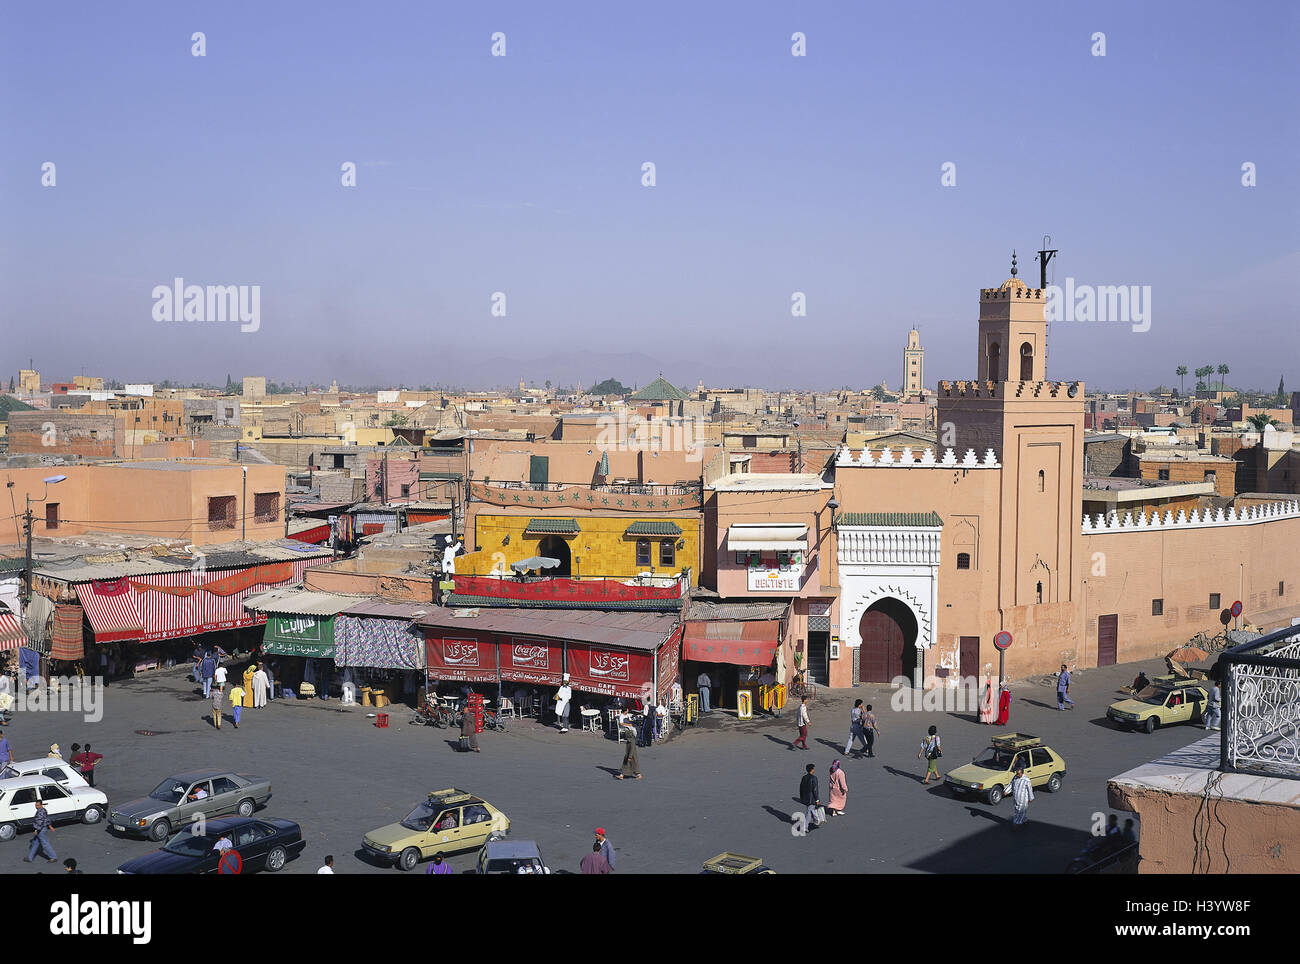 Morocco, Marrakech, Place Djemaa el-Fna, capital, town view, Old Town, Medina, centre, space Stock Photo